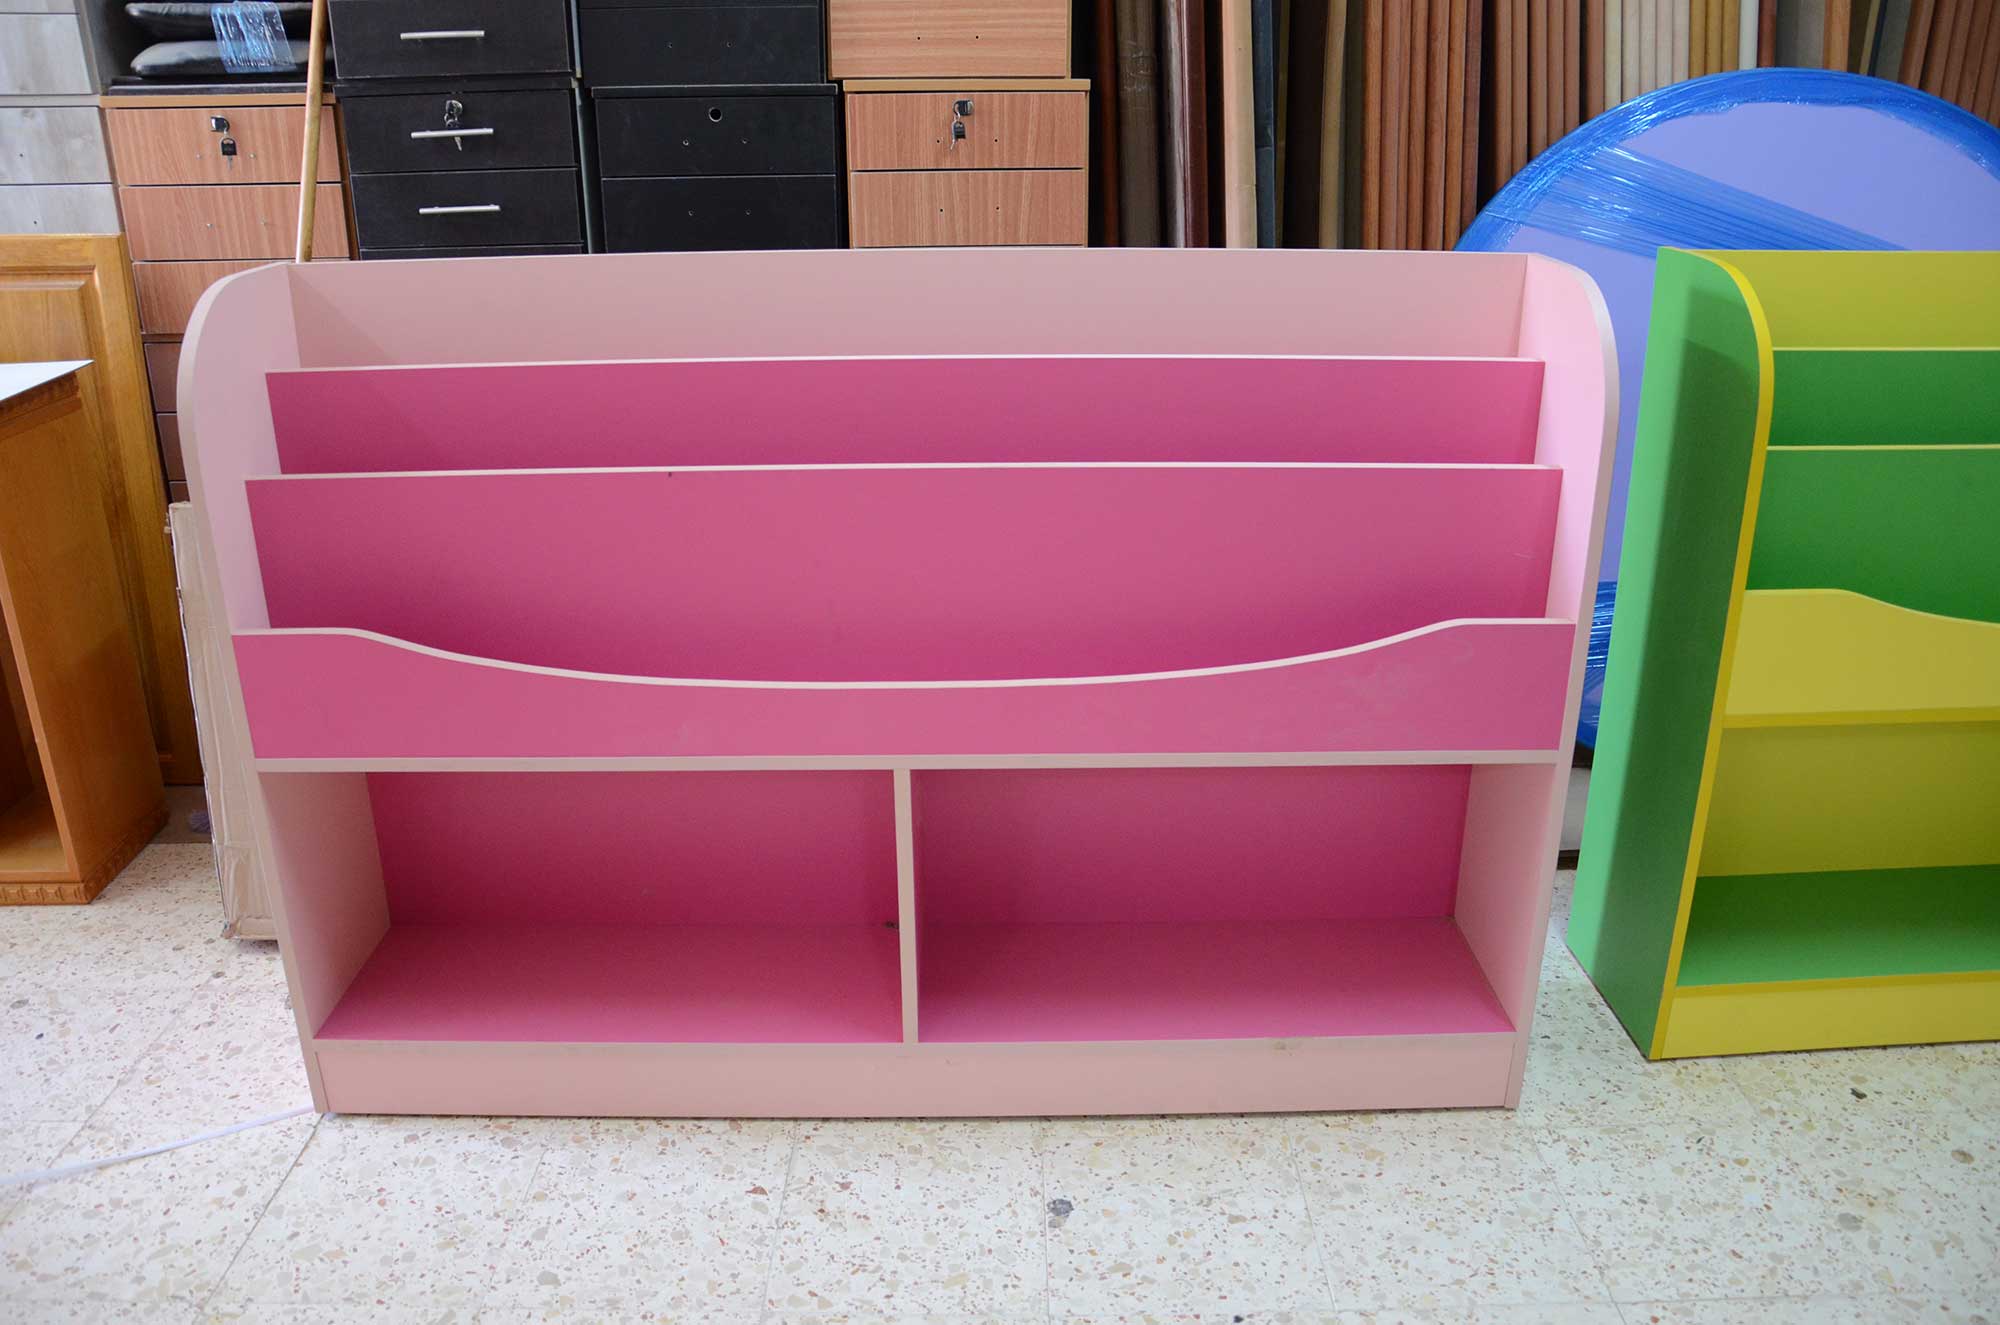 A pink bookshelf will infuse a preschool classroom with a positive, inviting vibe.